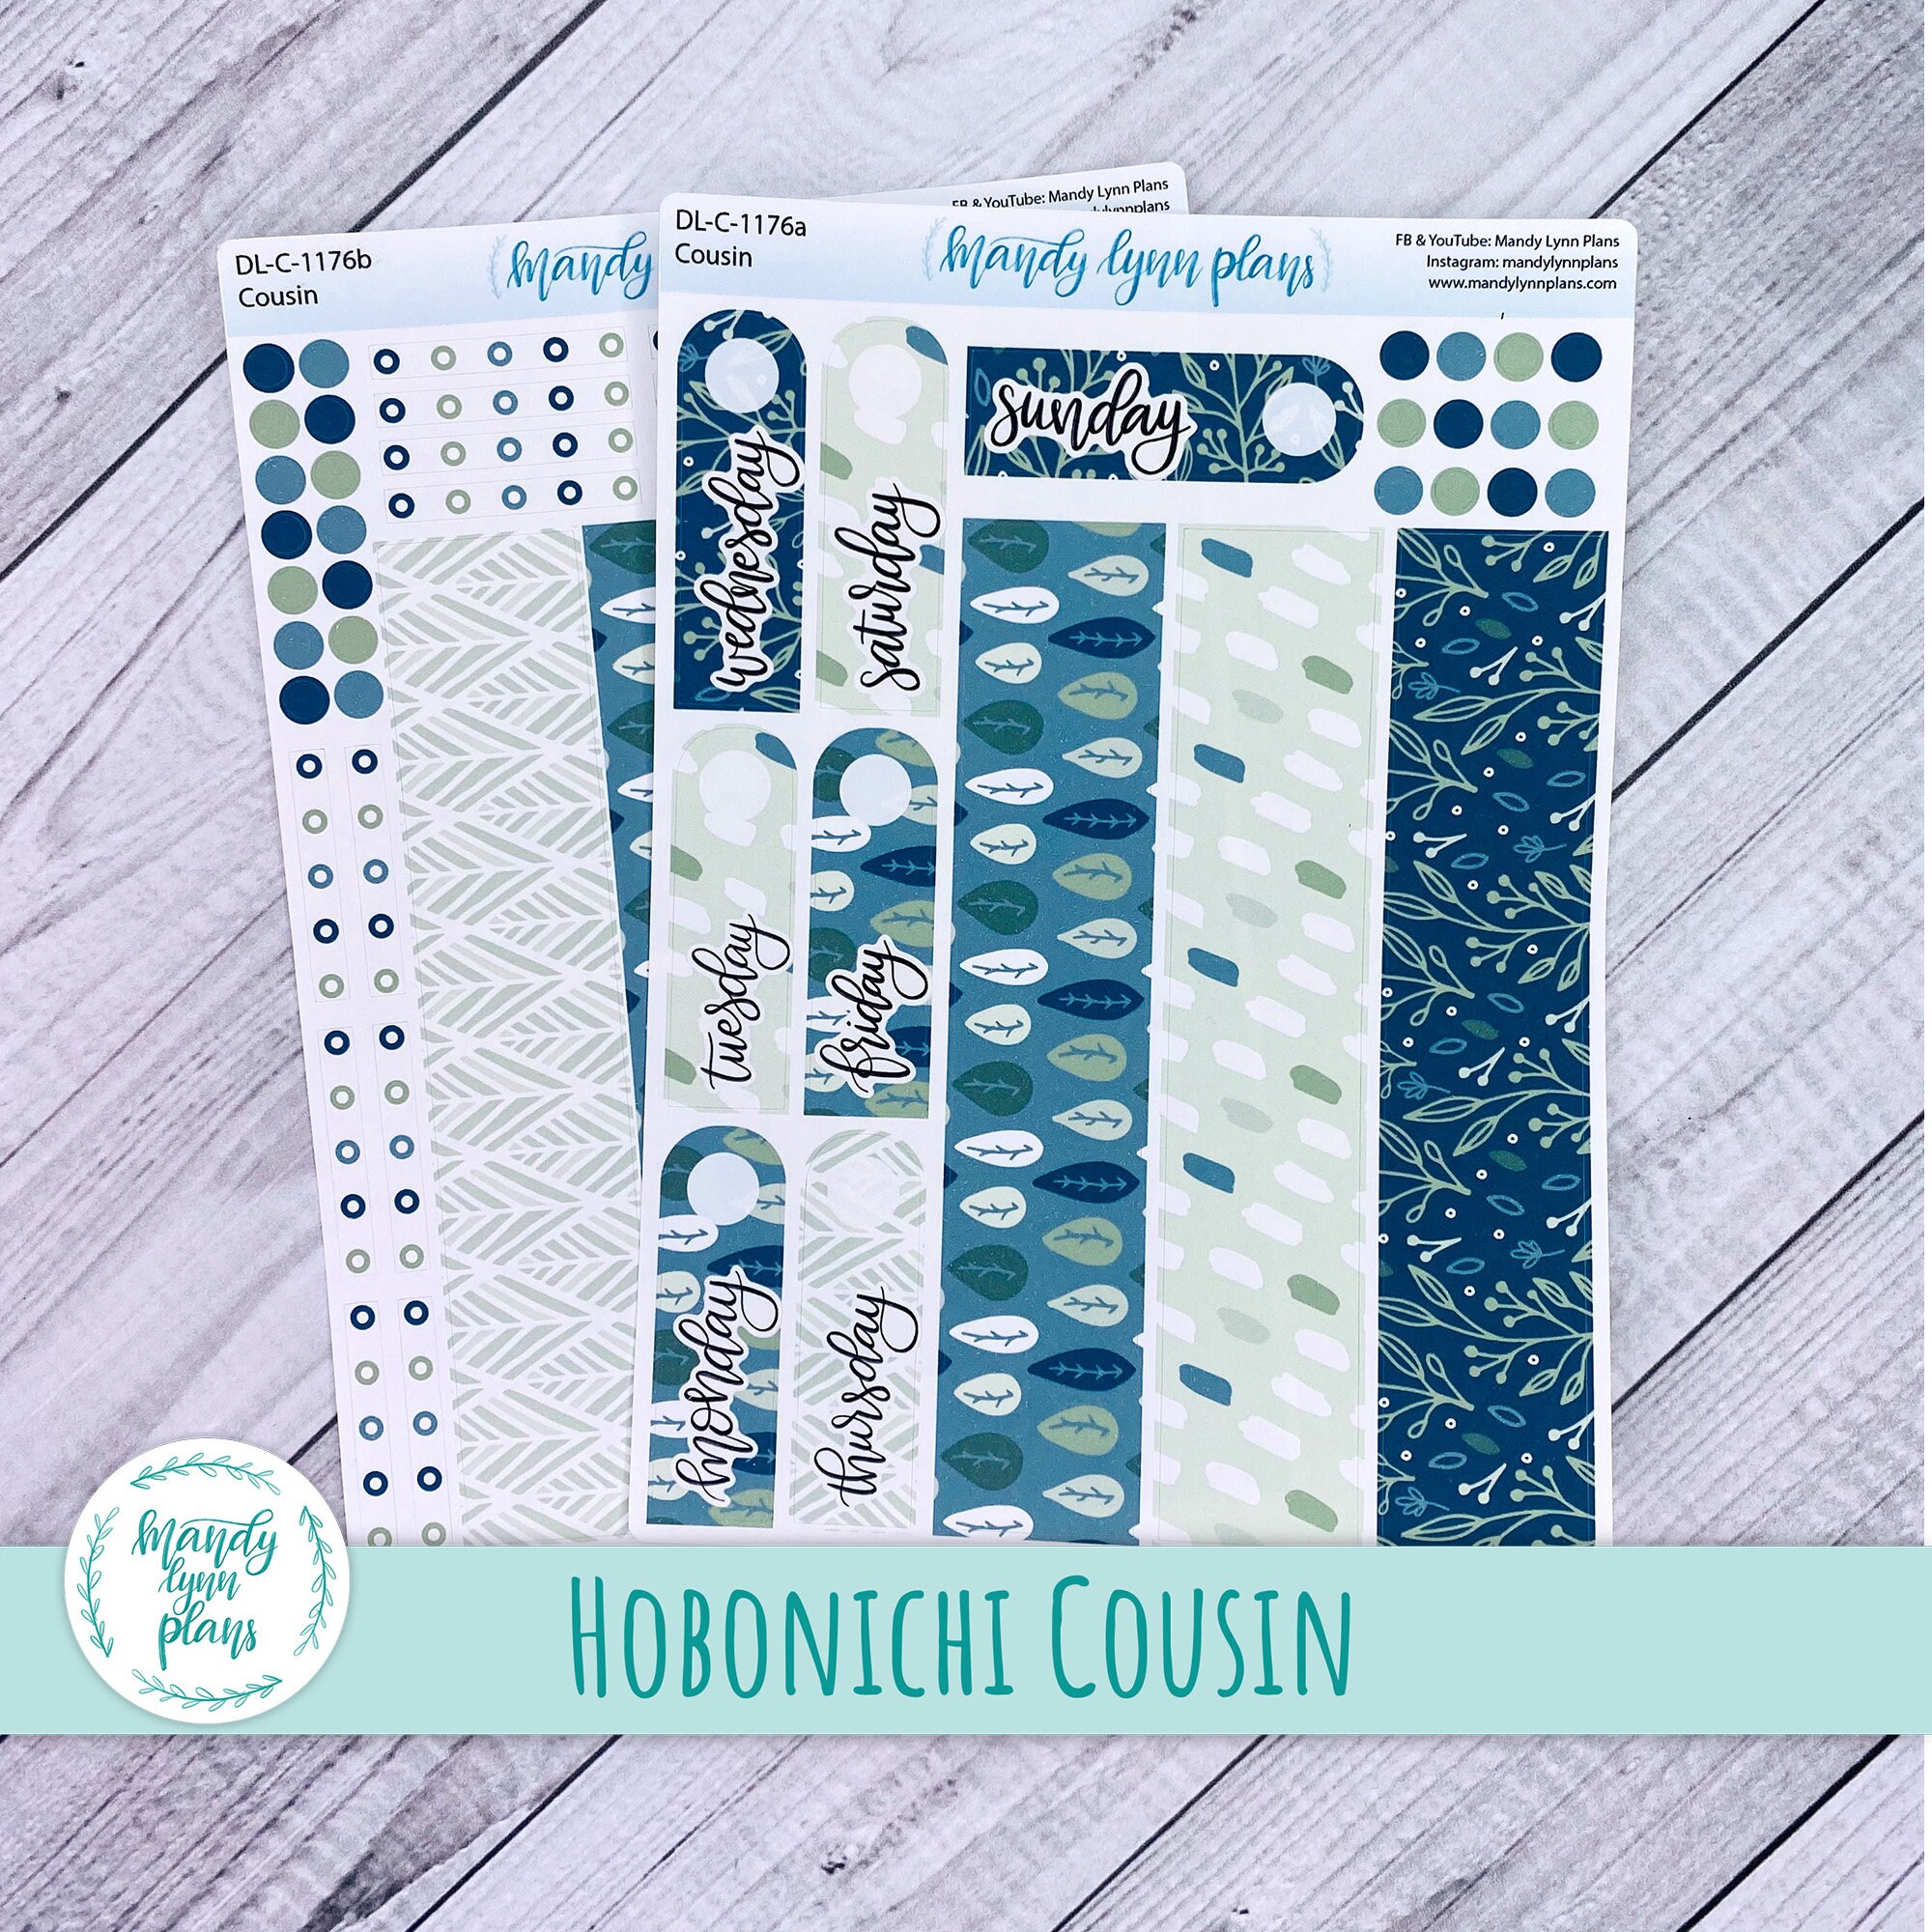 2024 HOBONICHI COUSIN Yearly Index & Date Strips